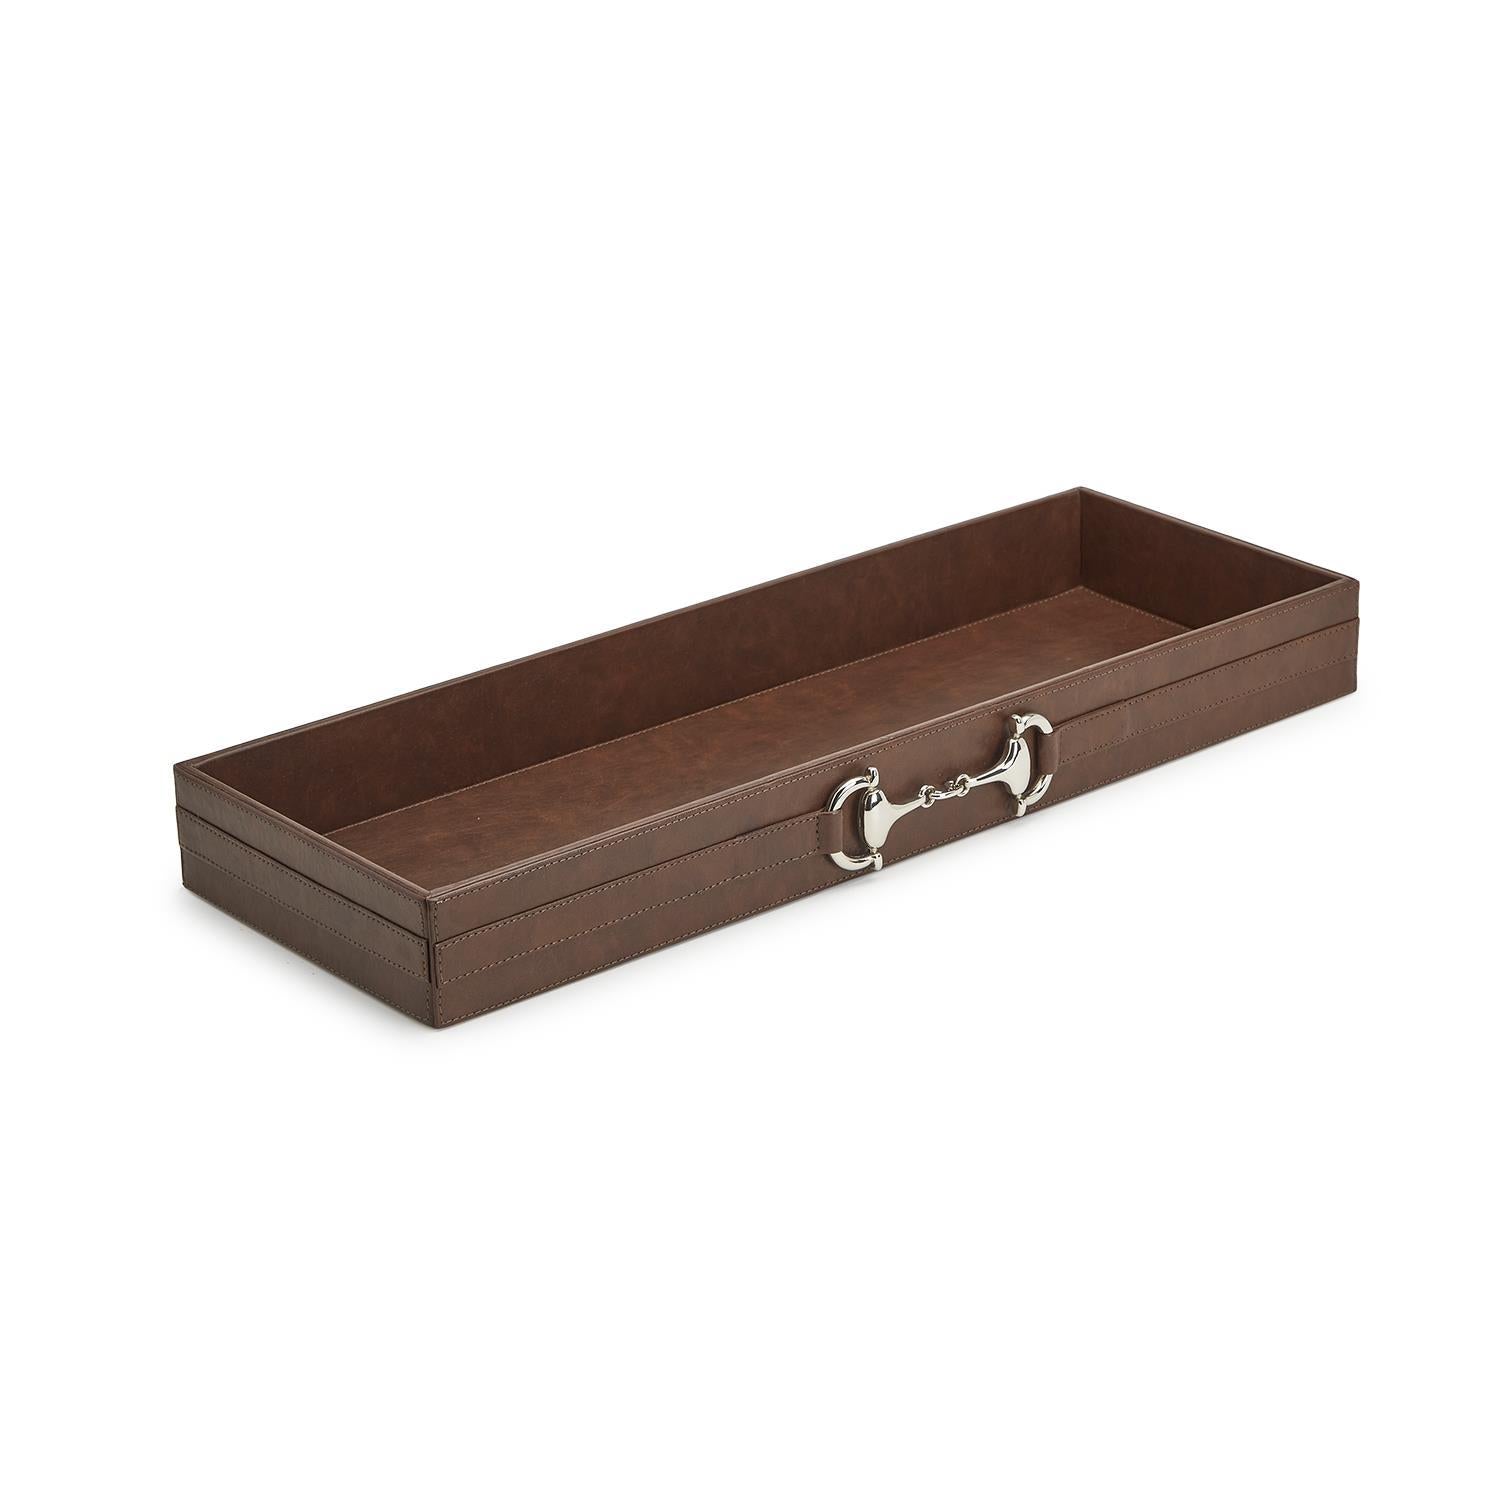 Two's Co Long Tray with Polished Horse Bit Accent